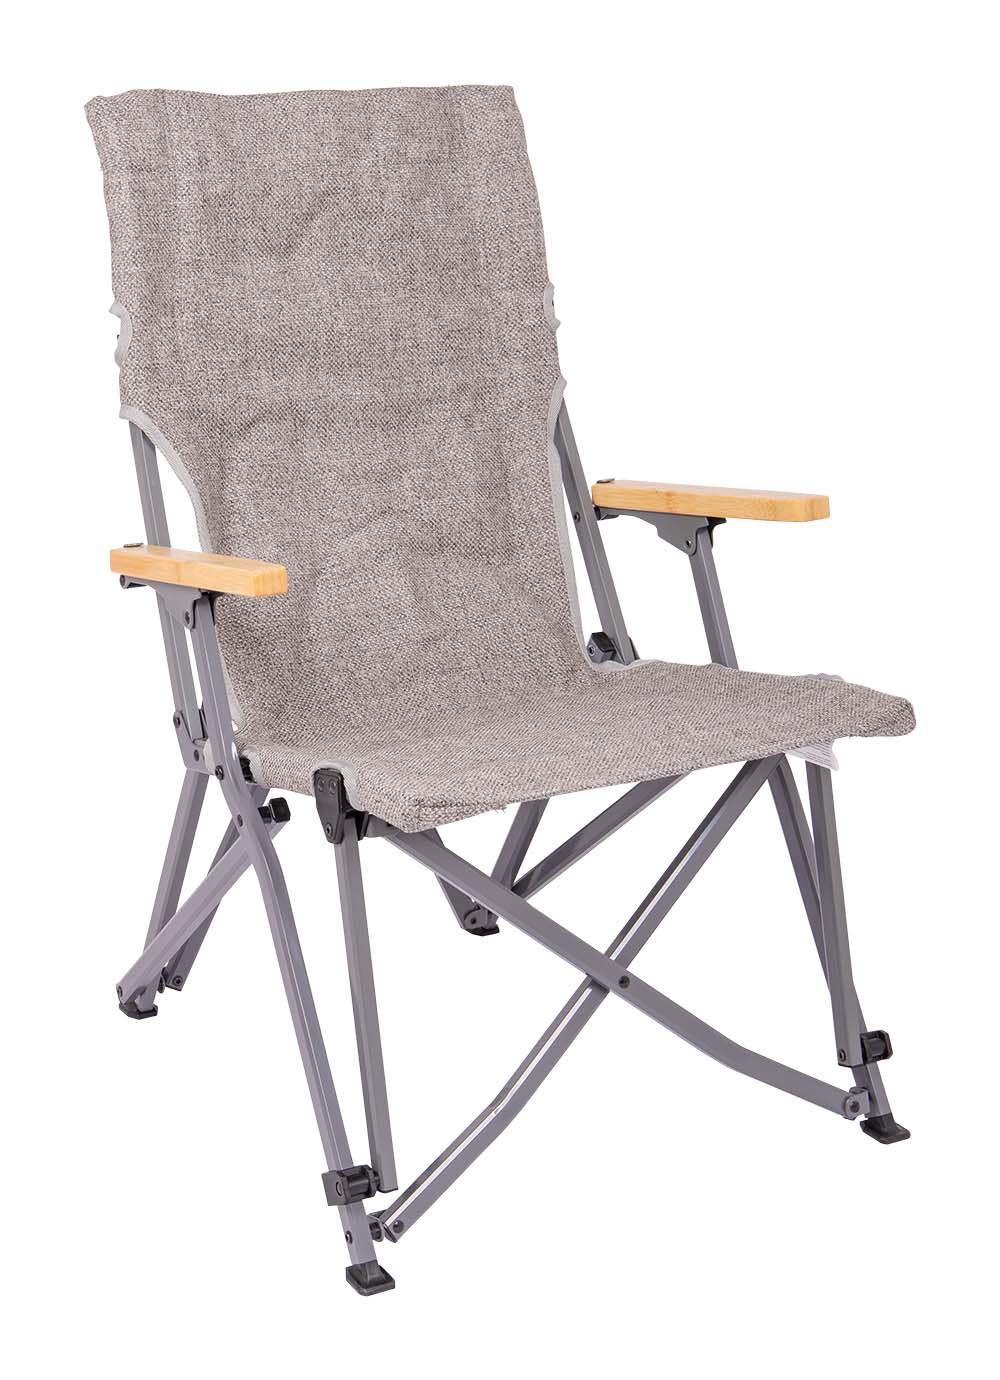 1204810 A comfortable folding chair from the Urban Outdoor collection with bamboo armrests. The upholstery is made of Nika which has a linen look. The dark gray aluminum frame makes the chair easy to fold. Can be used outside in the garden or at the campsite, at home on the balcony or in the living room. Compact and easy to carry in the included carry bag.